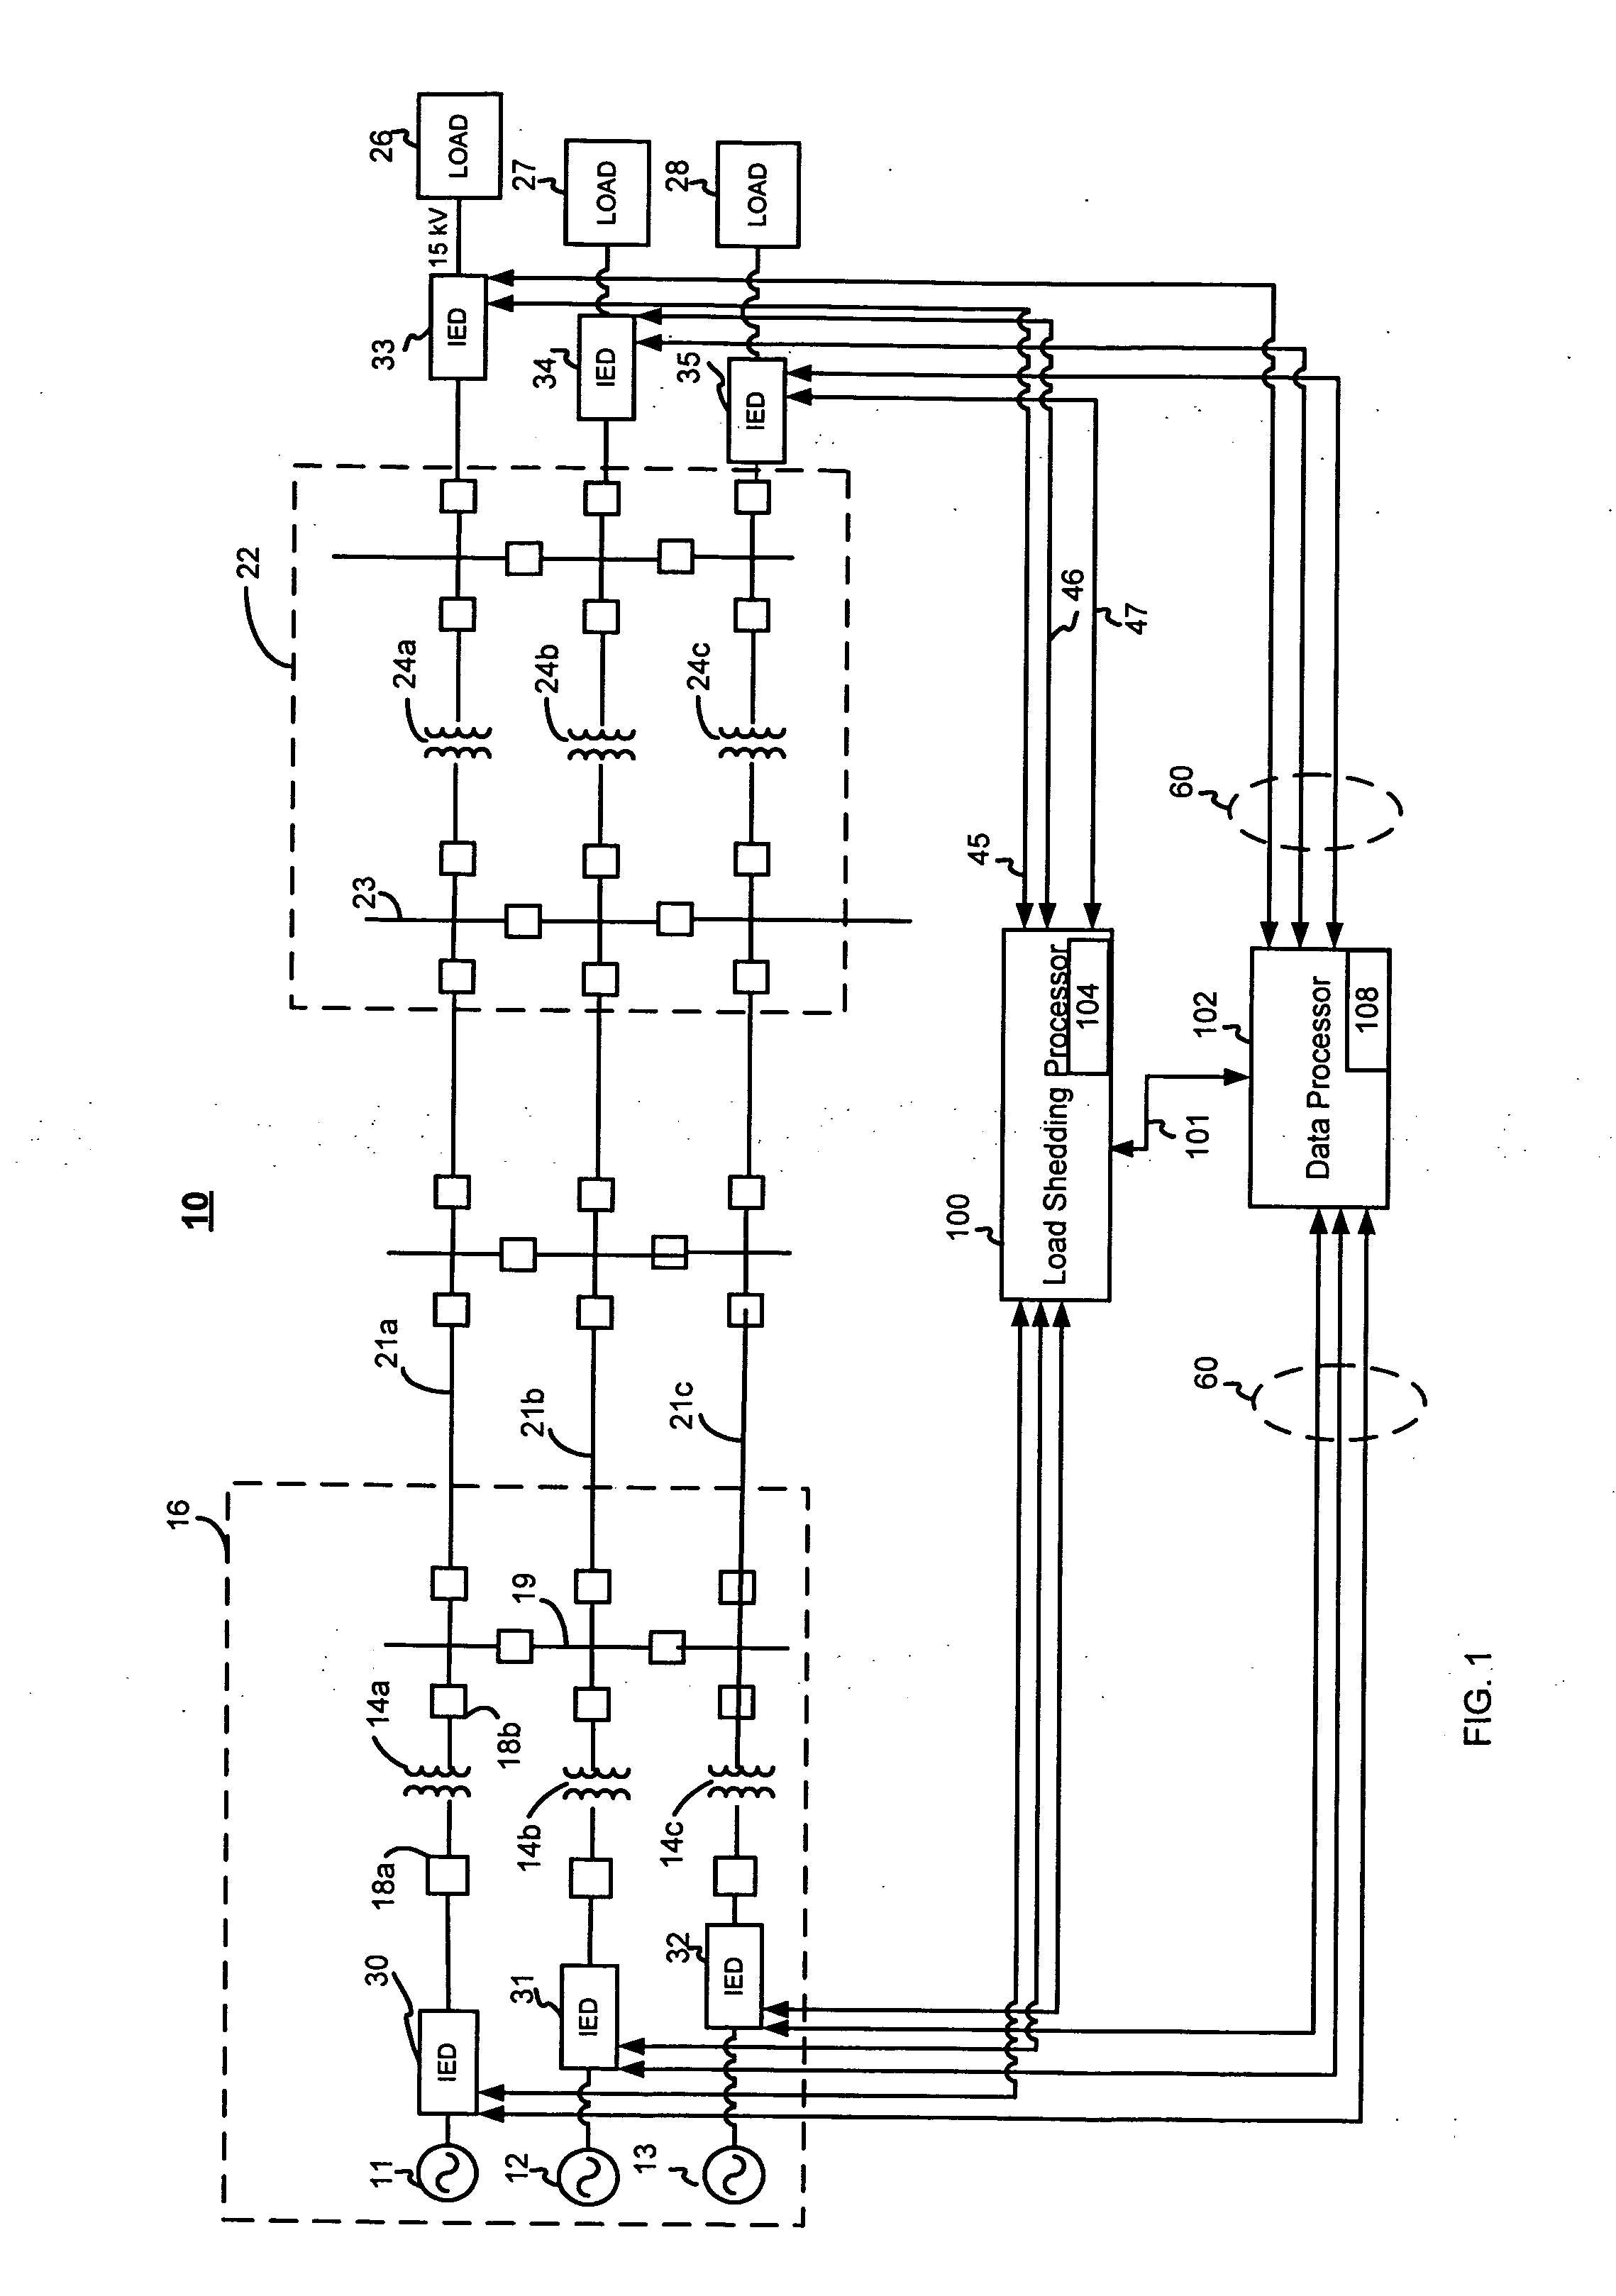 Apparatus and method for high-speed load shedding in an electrical power system